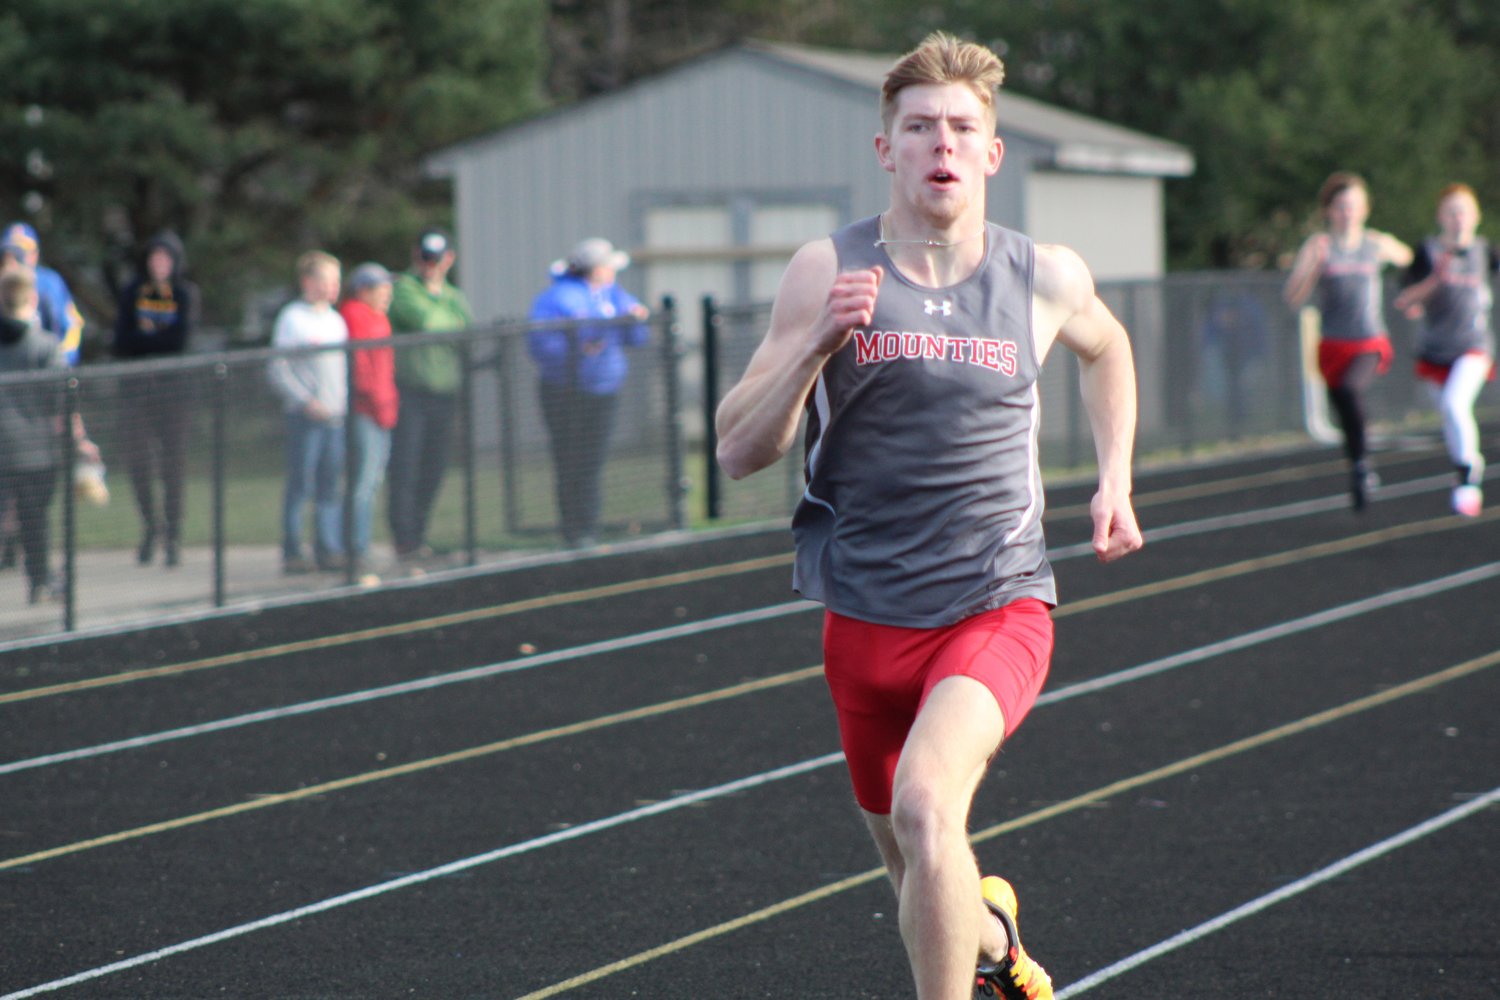 Trent Jones placed first in three events for the Mounties to help lead them to a season opening win over Crawfordsville.